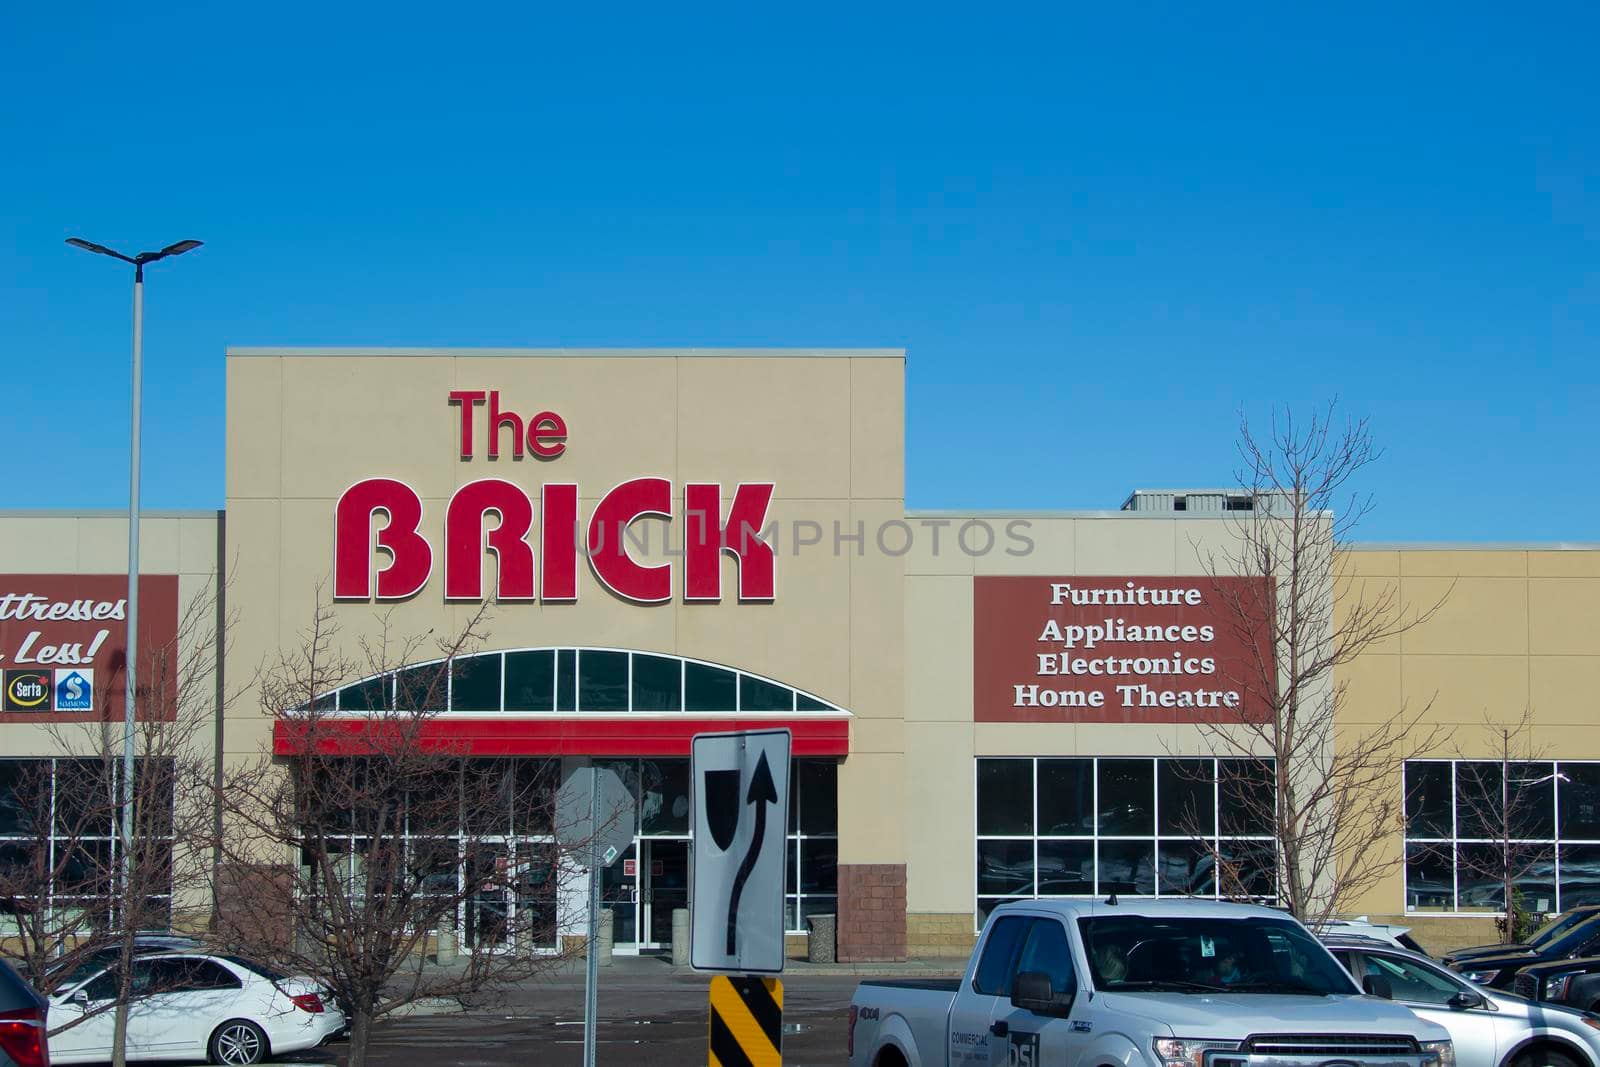 Calgary Alberta, Canada. Oct 17, 2020. The Brick is a Canadian retailer of furniture, mattresses, appliances and home electronics from Edmonton, Alberta, Canada. by oasisamuel